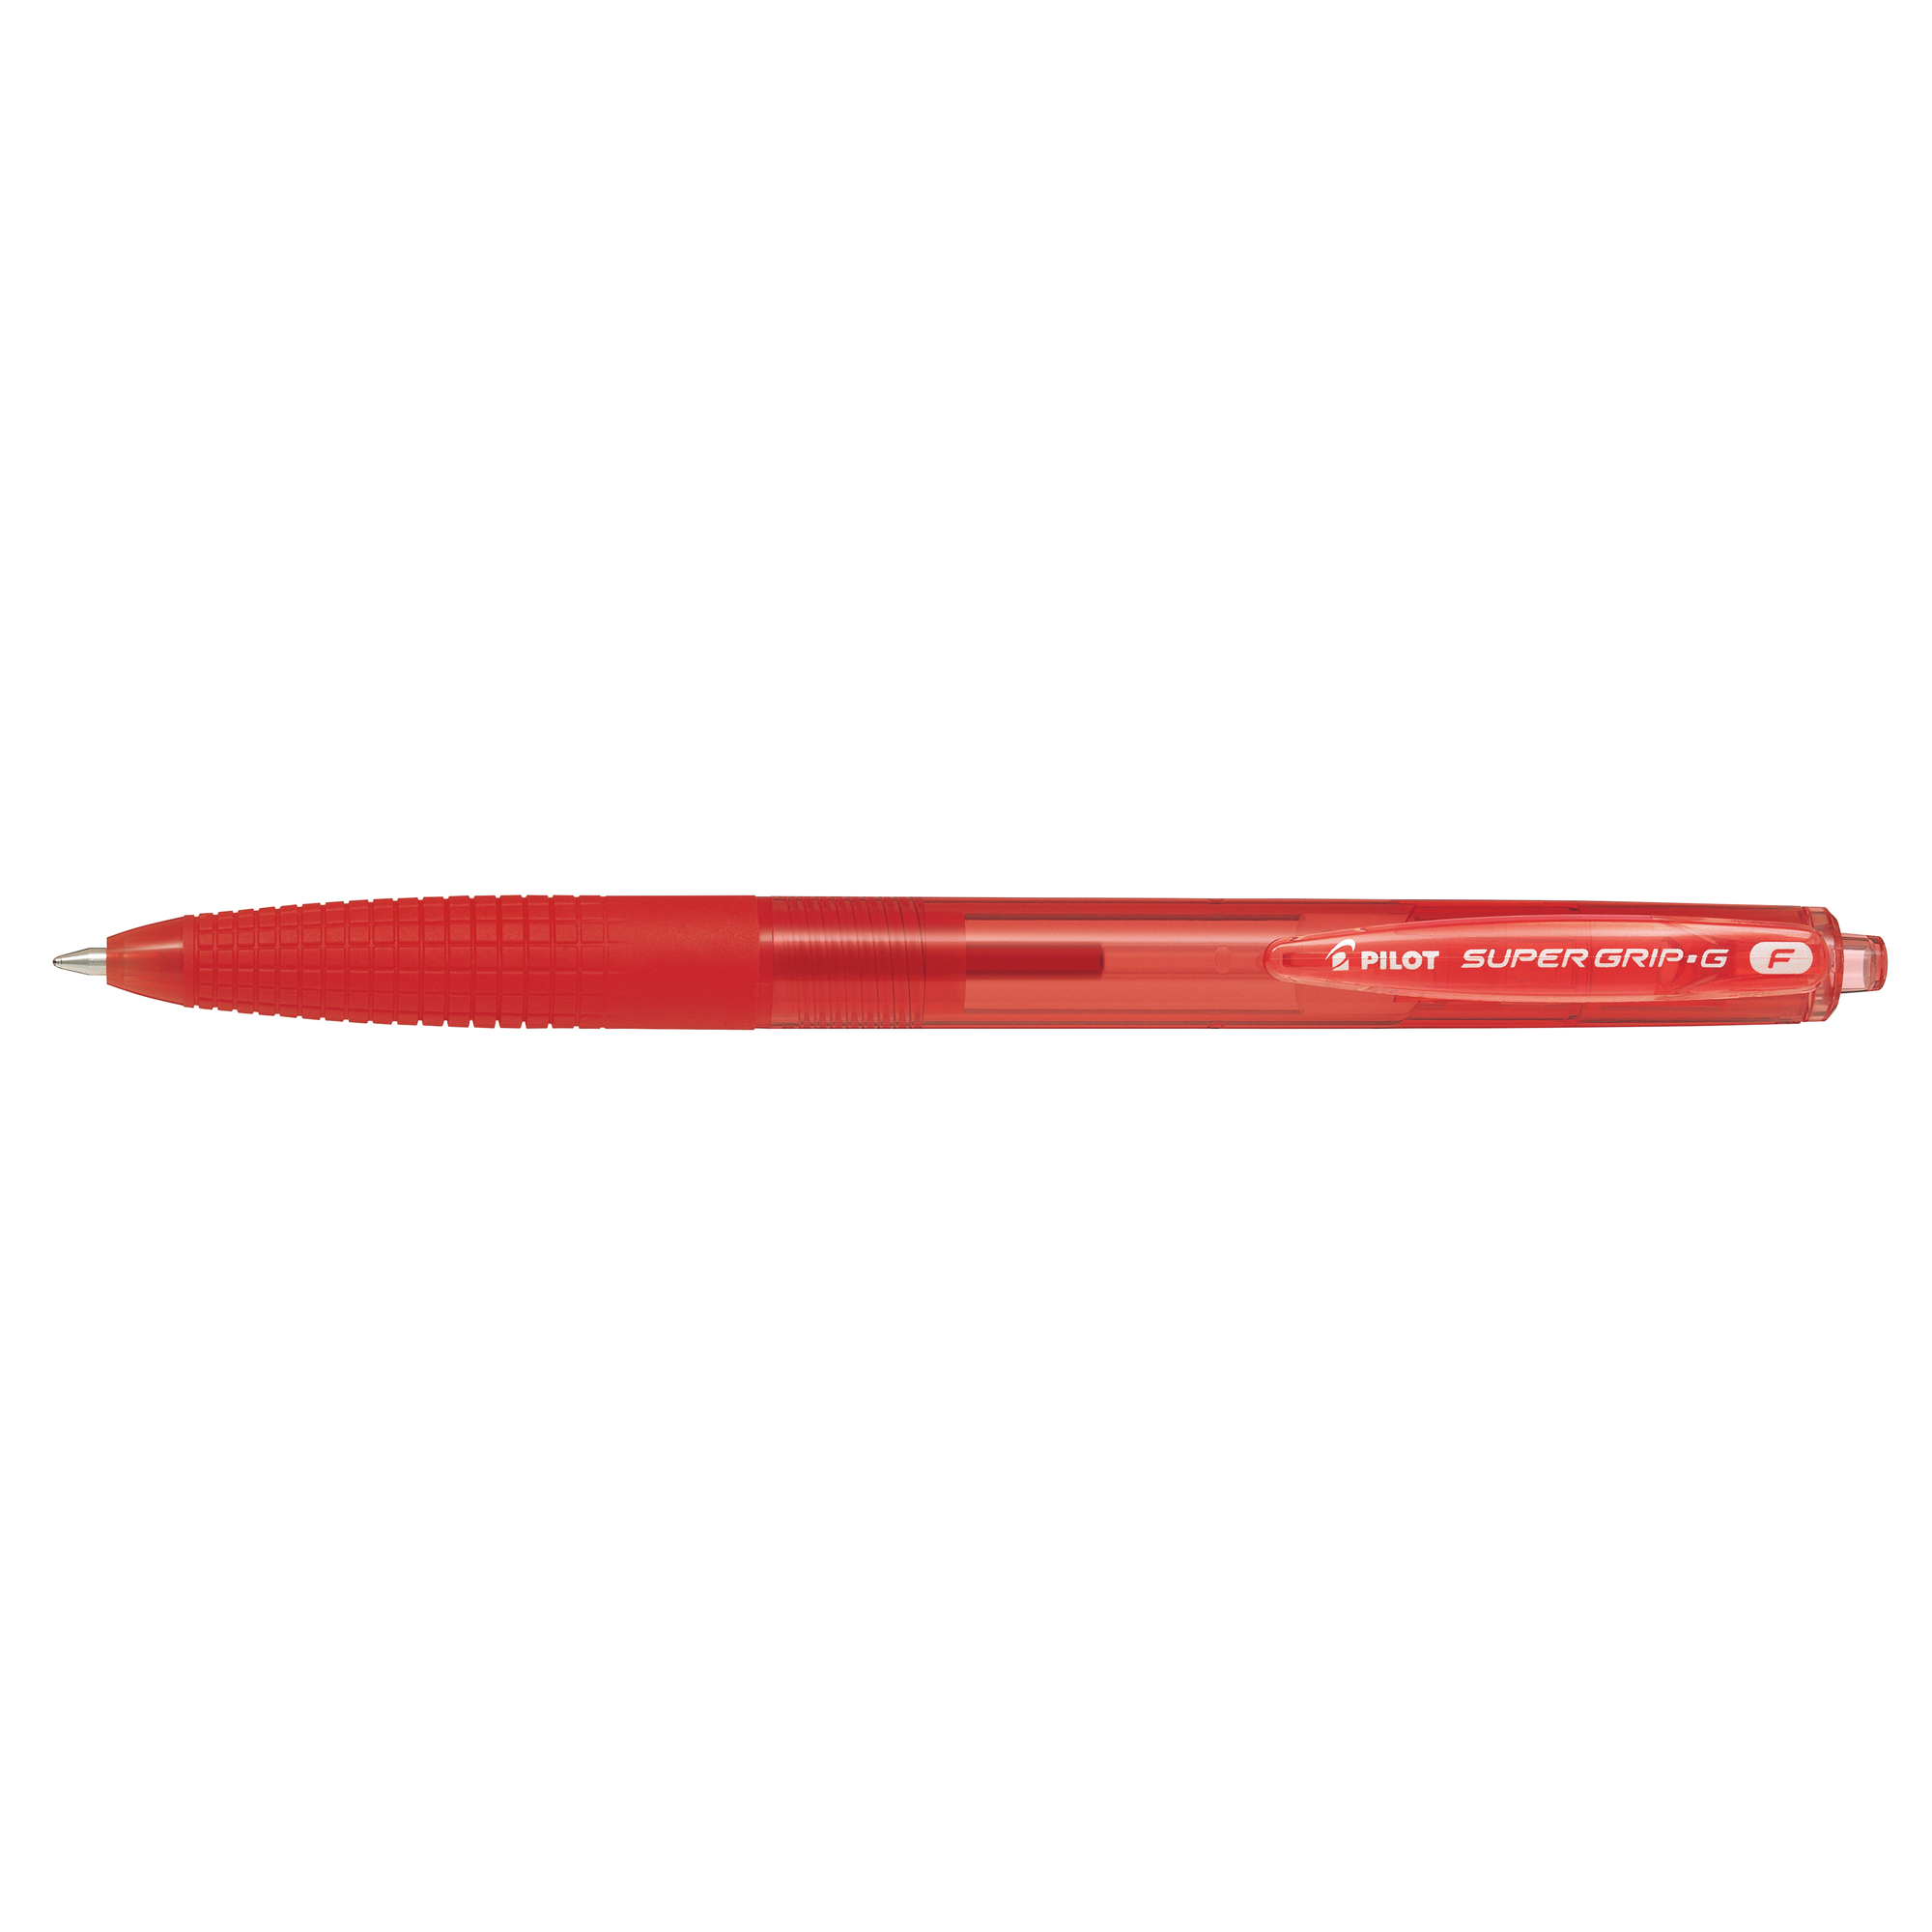 S Grip G Scatto 0 7mm Rosso Pilot 1640 4902505524455